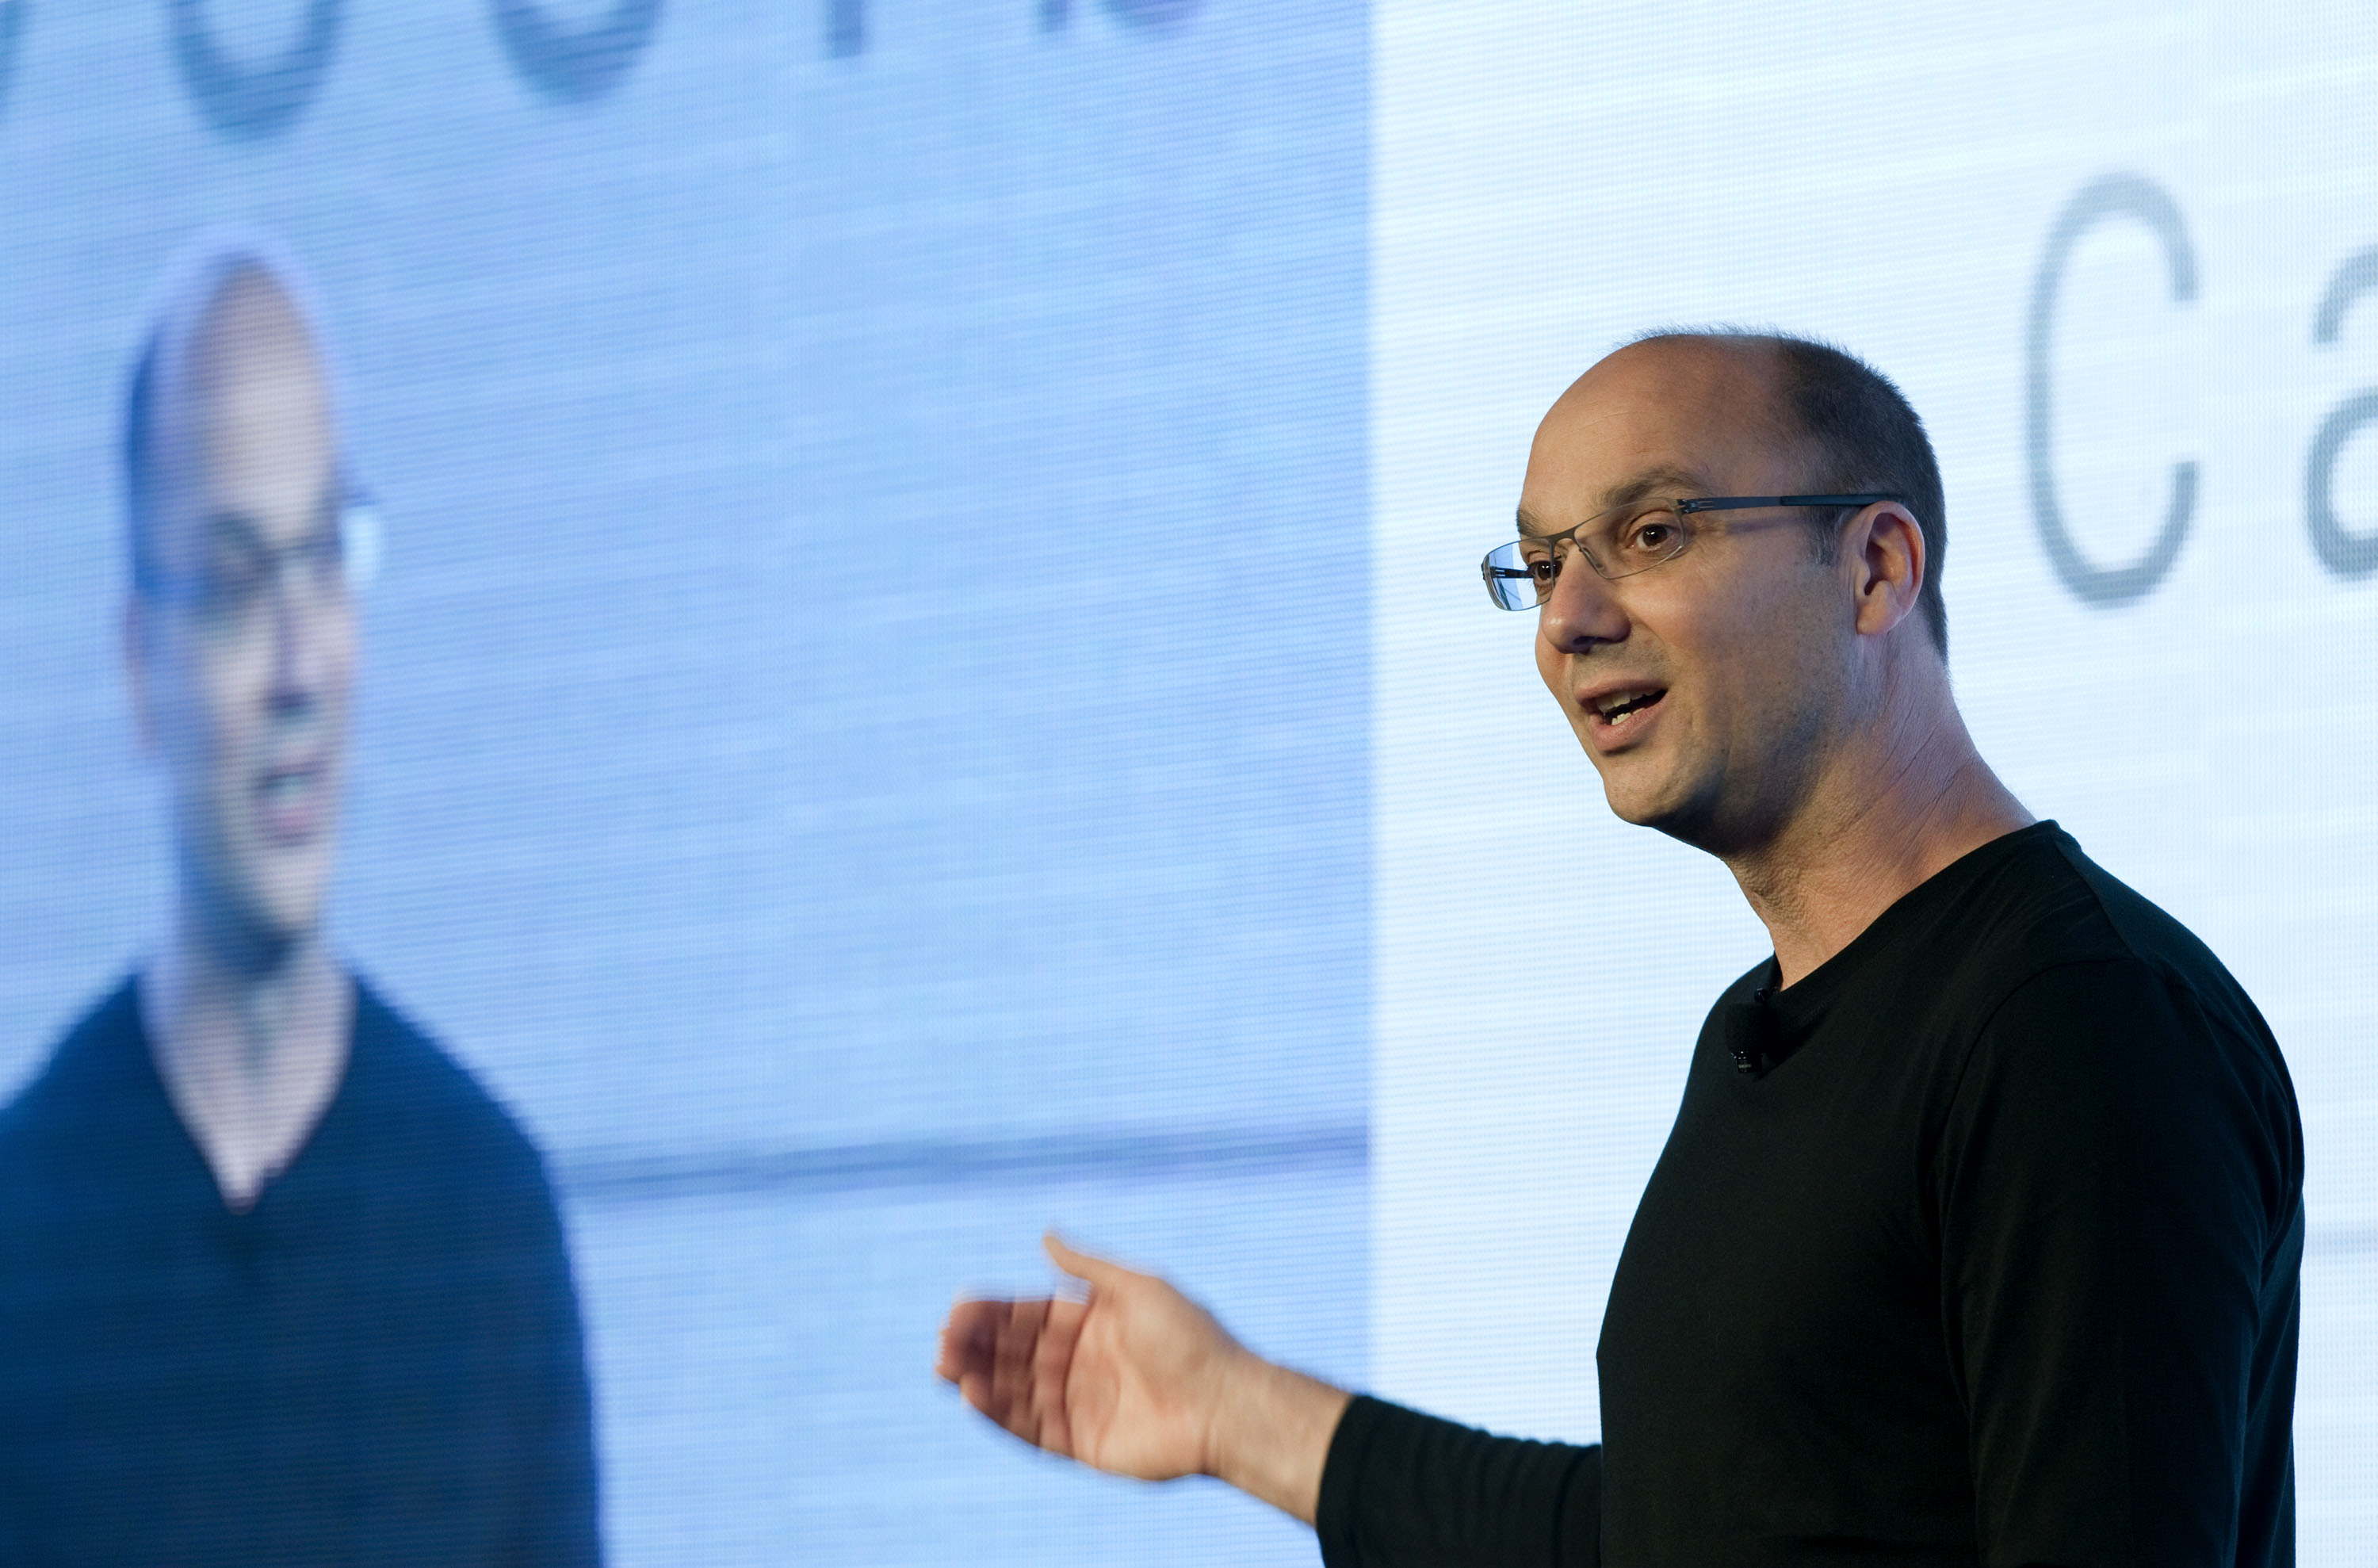 Andy Rubin, senior vice-president of Google Inc.'s mobile division, speaks during an event in Hong Kong, China, on Wednesday, Oct. 19, 2011. (Jerome Favre—Bloomberg / Getty Images)